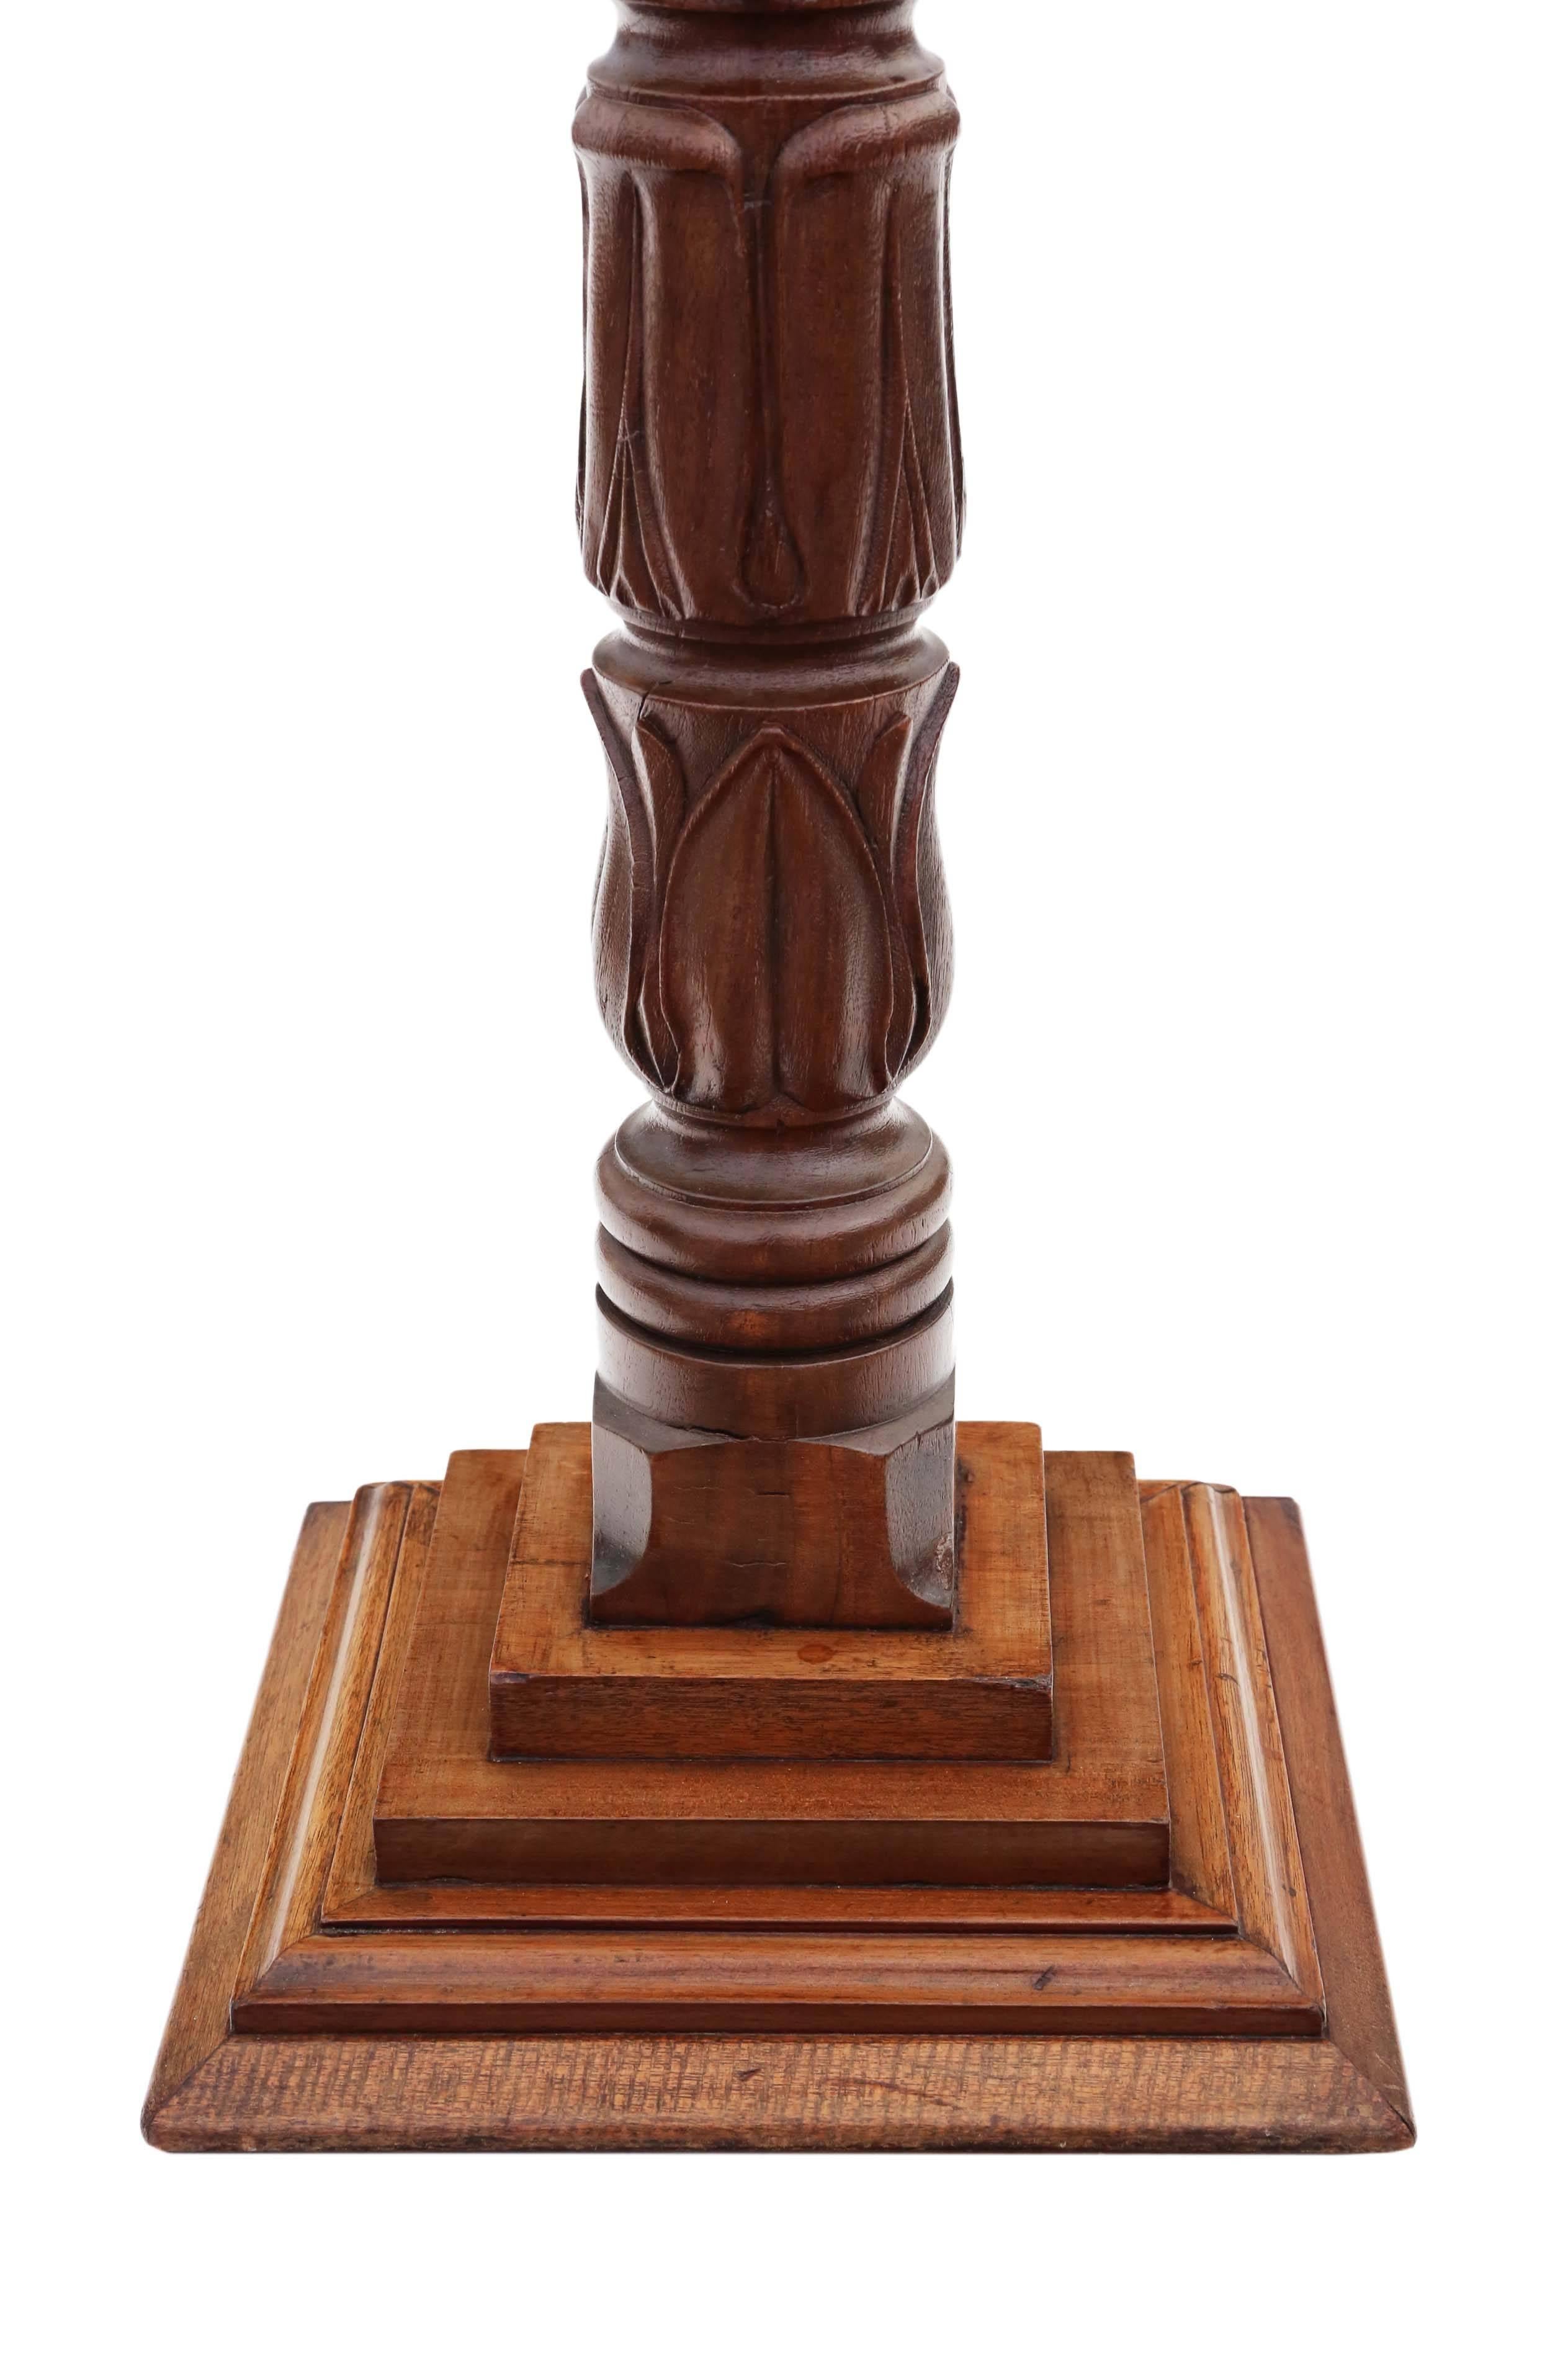 Early 20th Century Antique Victorian Mahogany Torchiere Jardiniere Stand Pedestal Plant Table For Sale